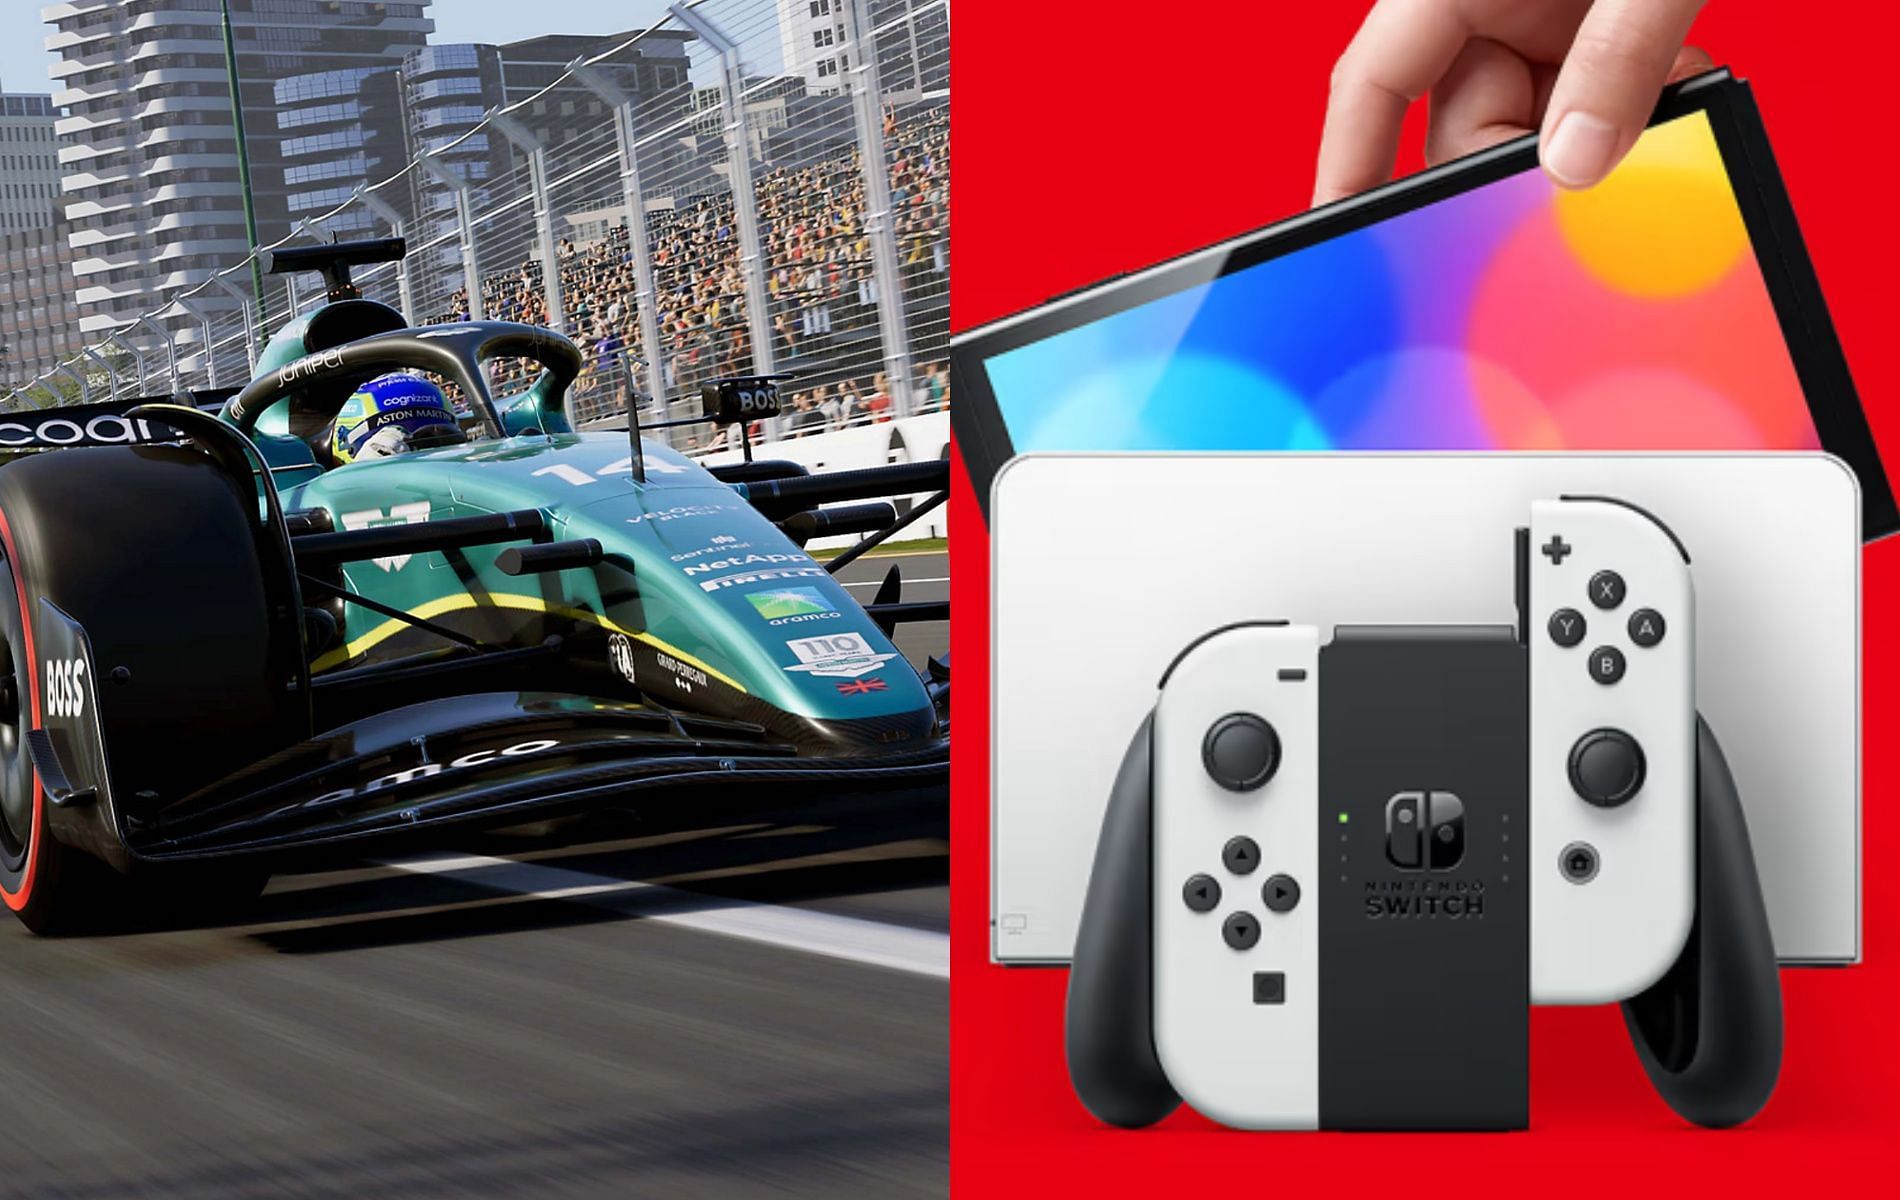 Nintendo Switch Is F1 23 available on the Nintendo Switch?